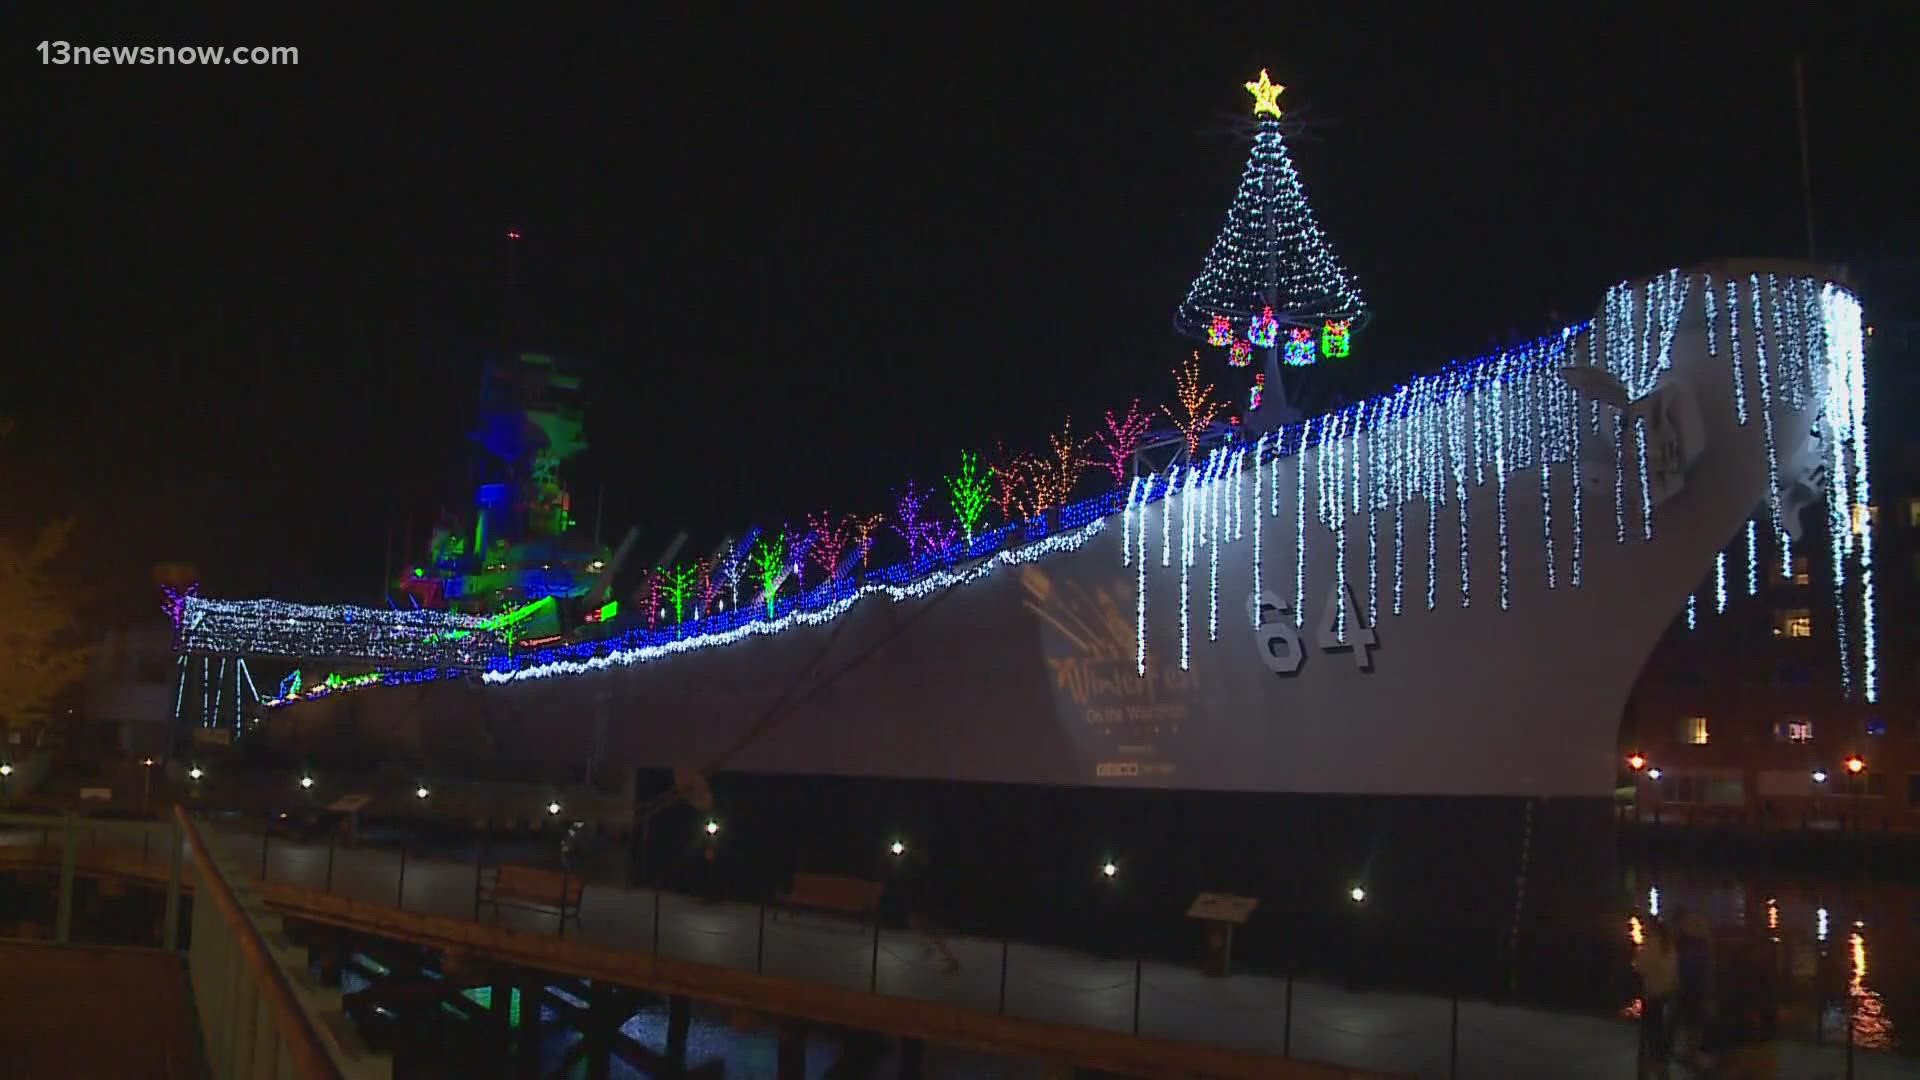 WinterFest on the Wisconsin is back and it will even bring some new attractions!